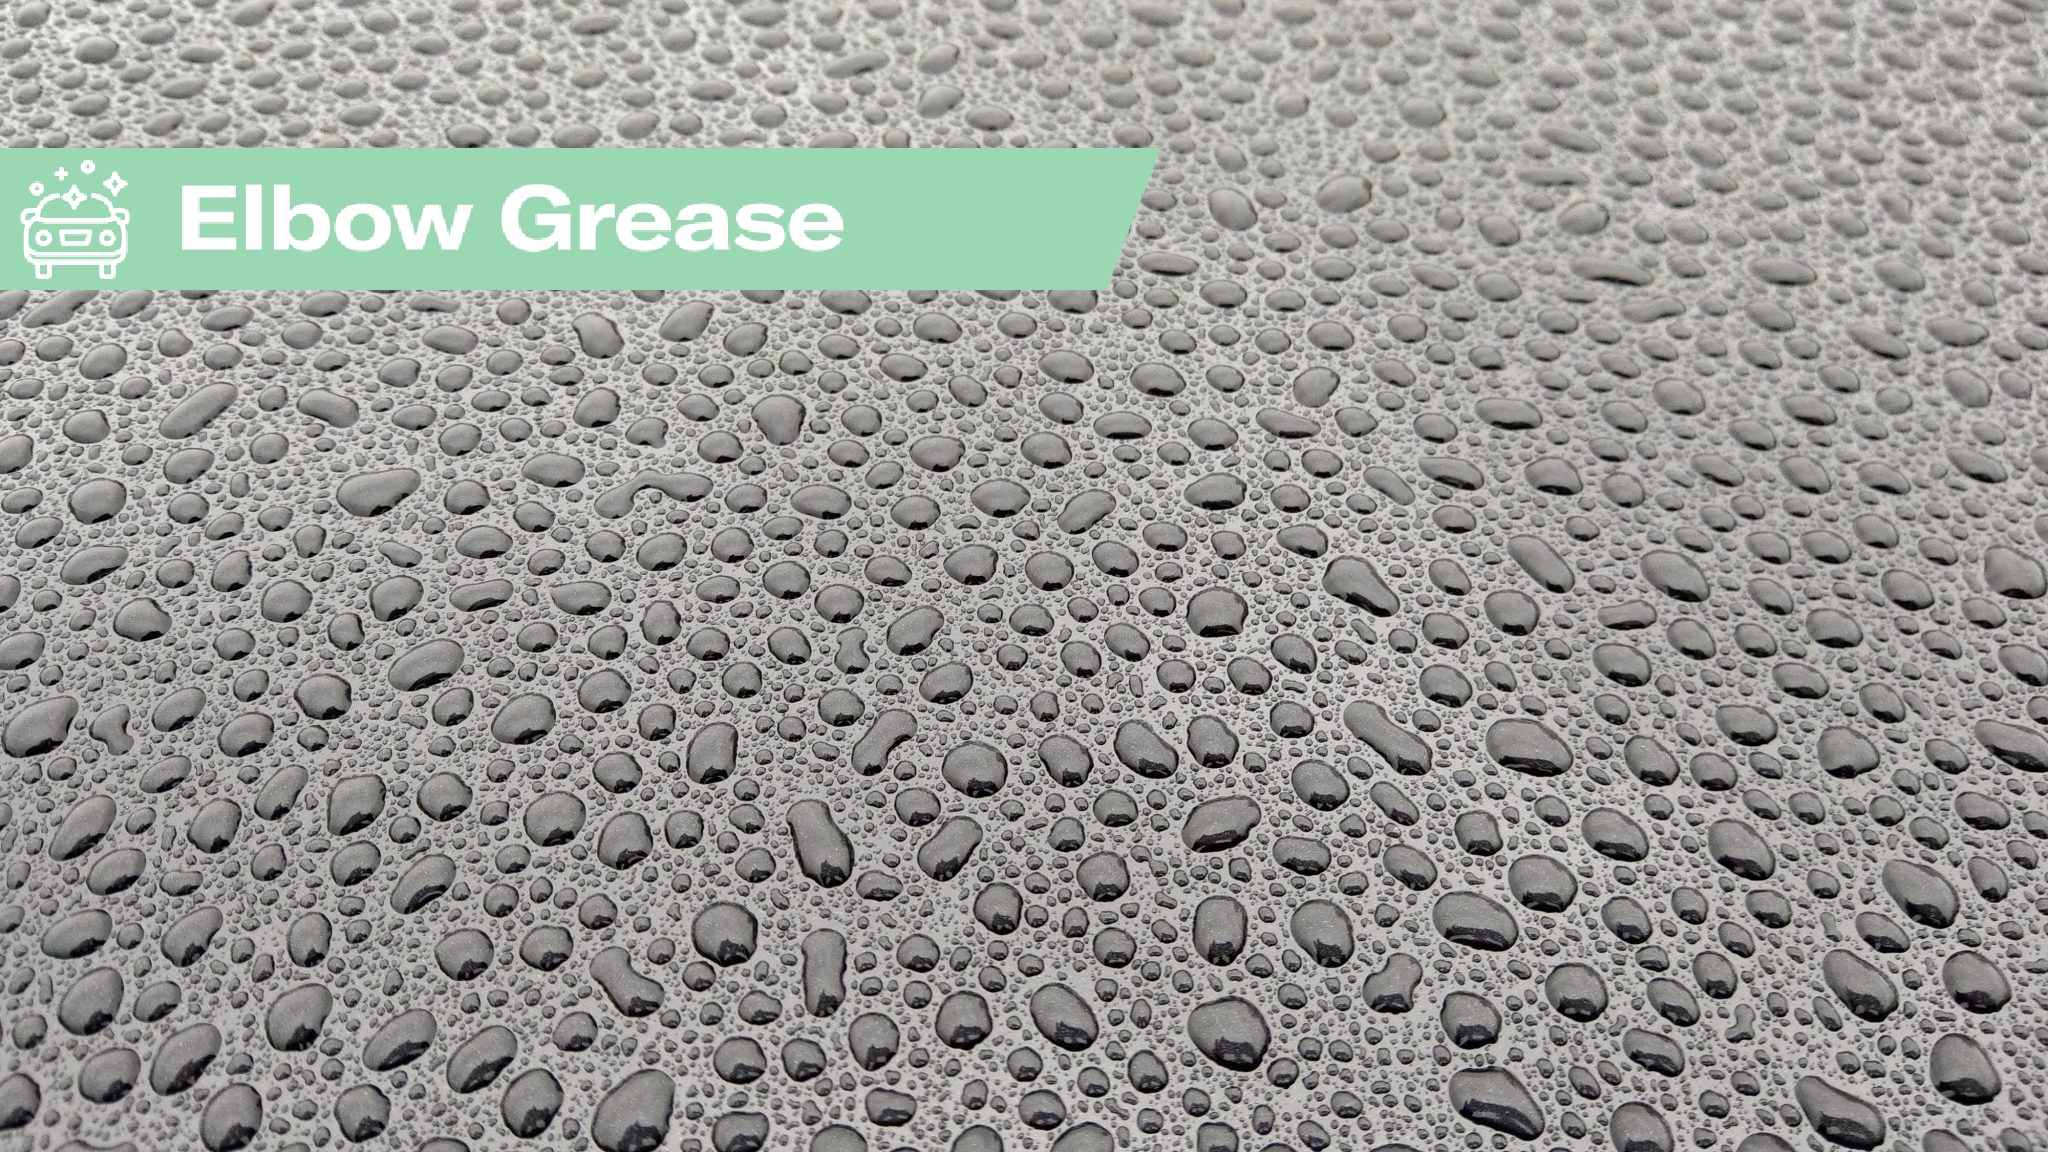 Elbow Grease: What car cleaning tips do YOU want to know?